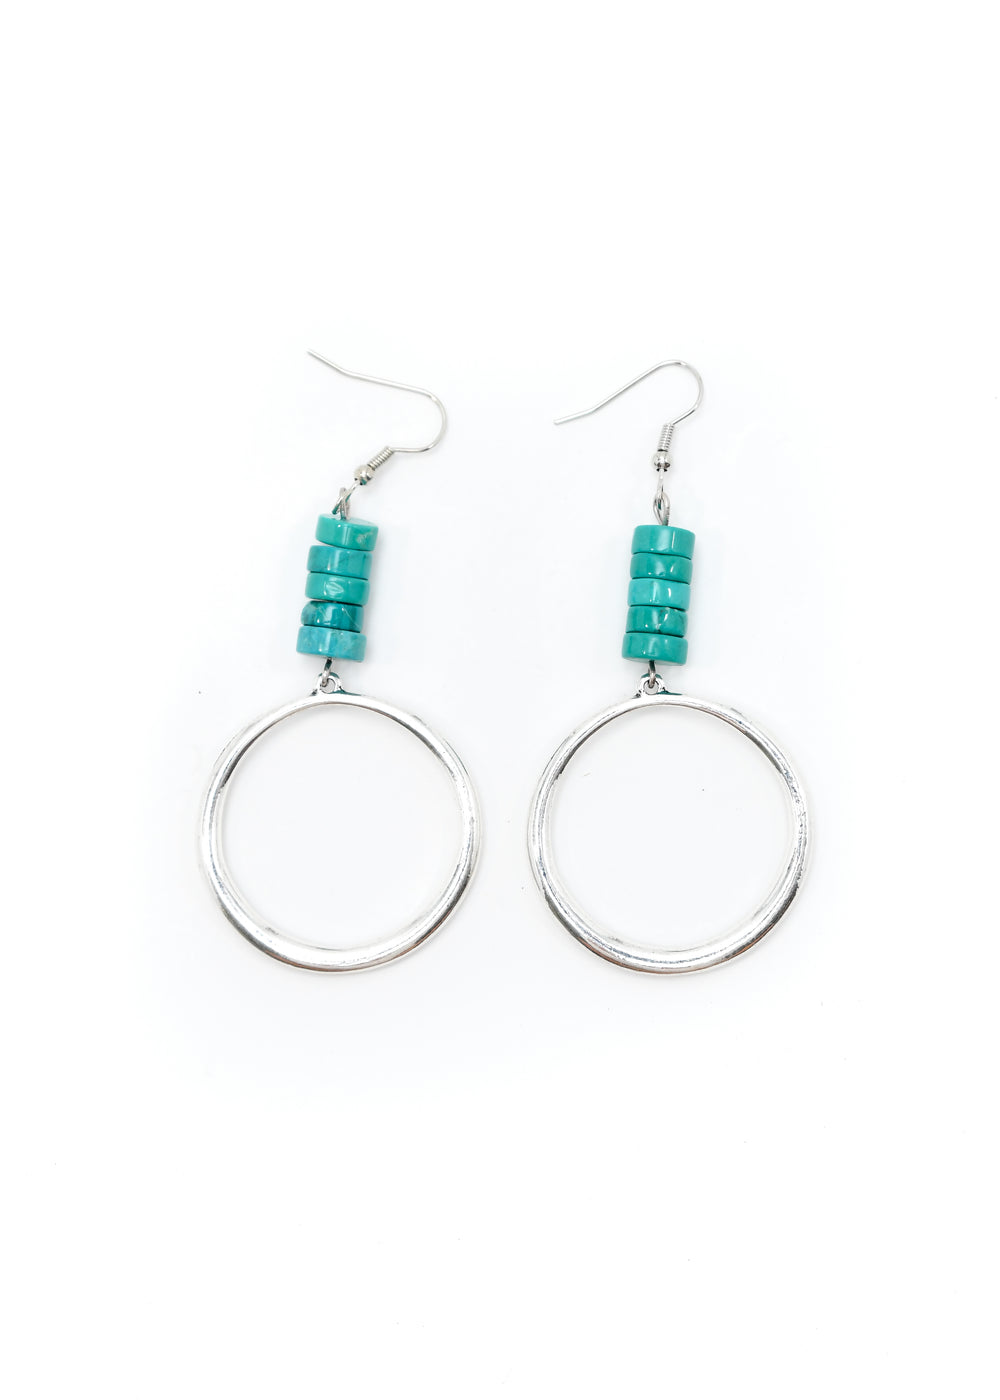 3" Silver Hoop Earring with Turquoise beaded Accent on Fishook